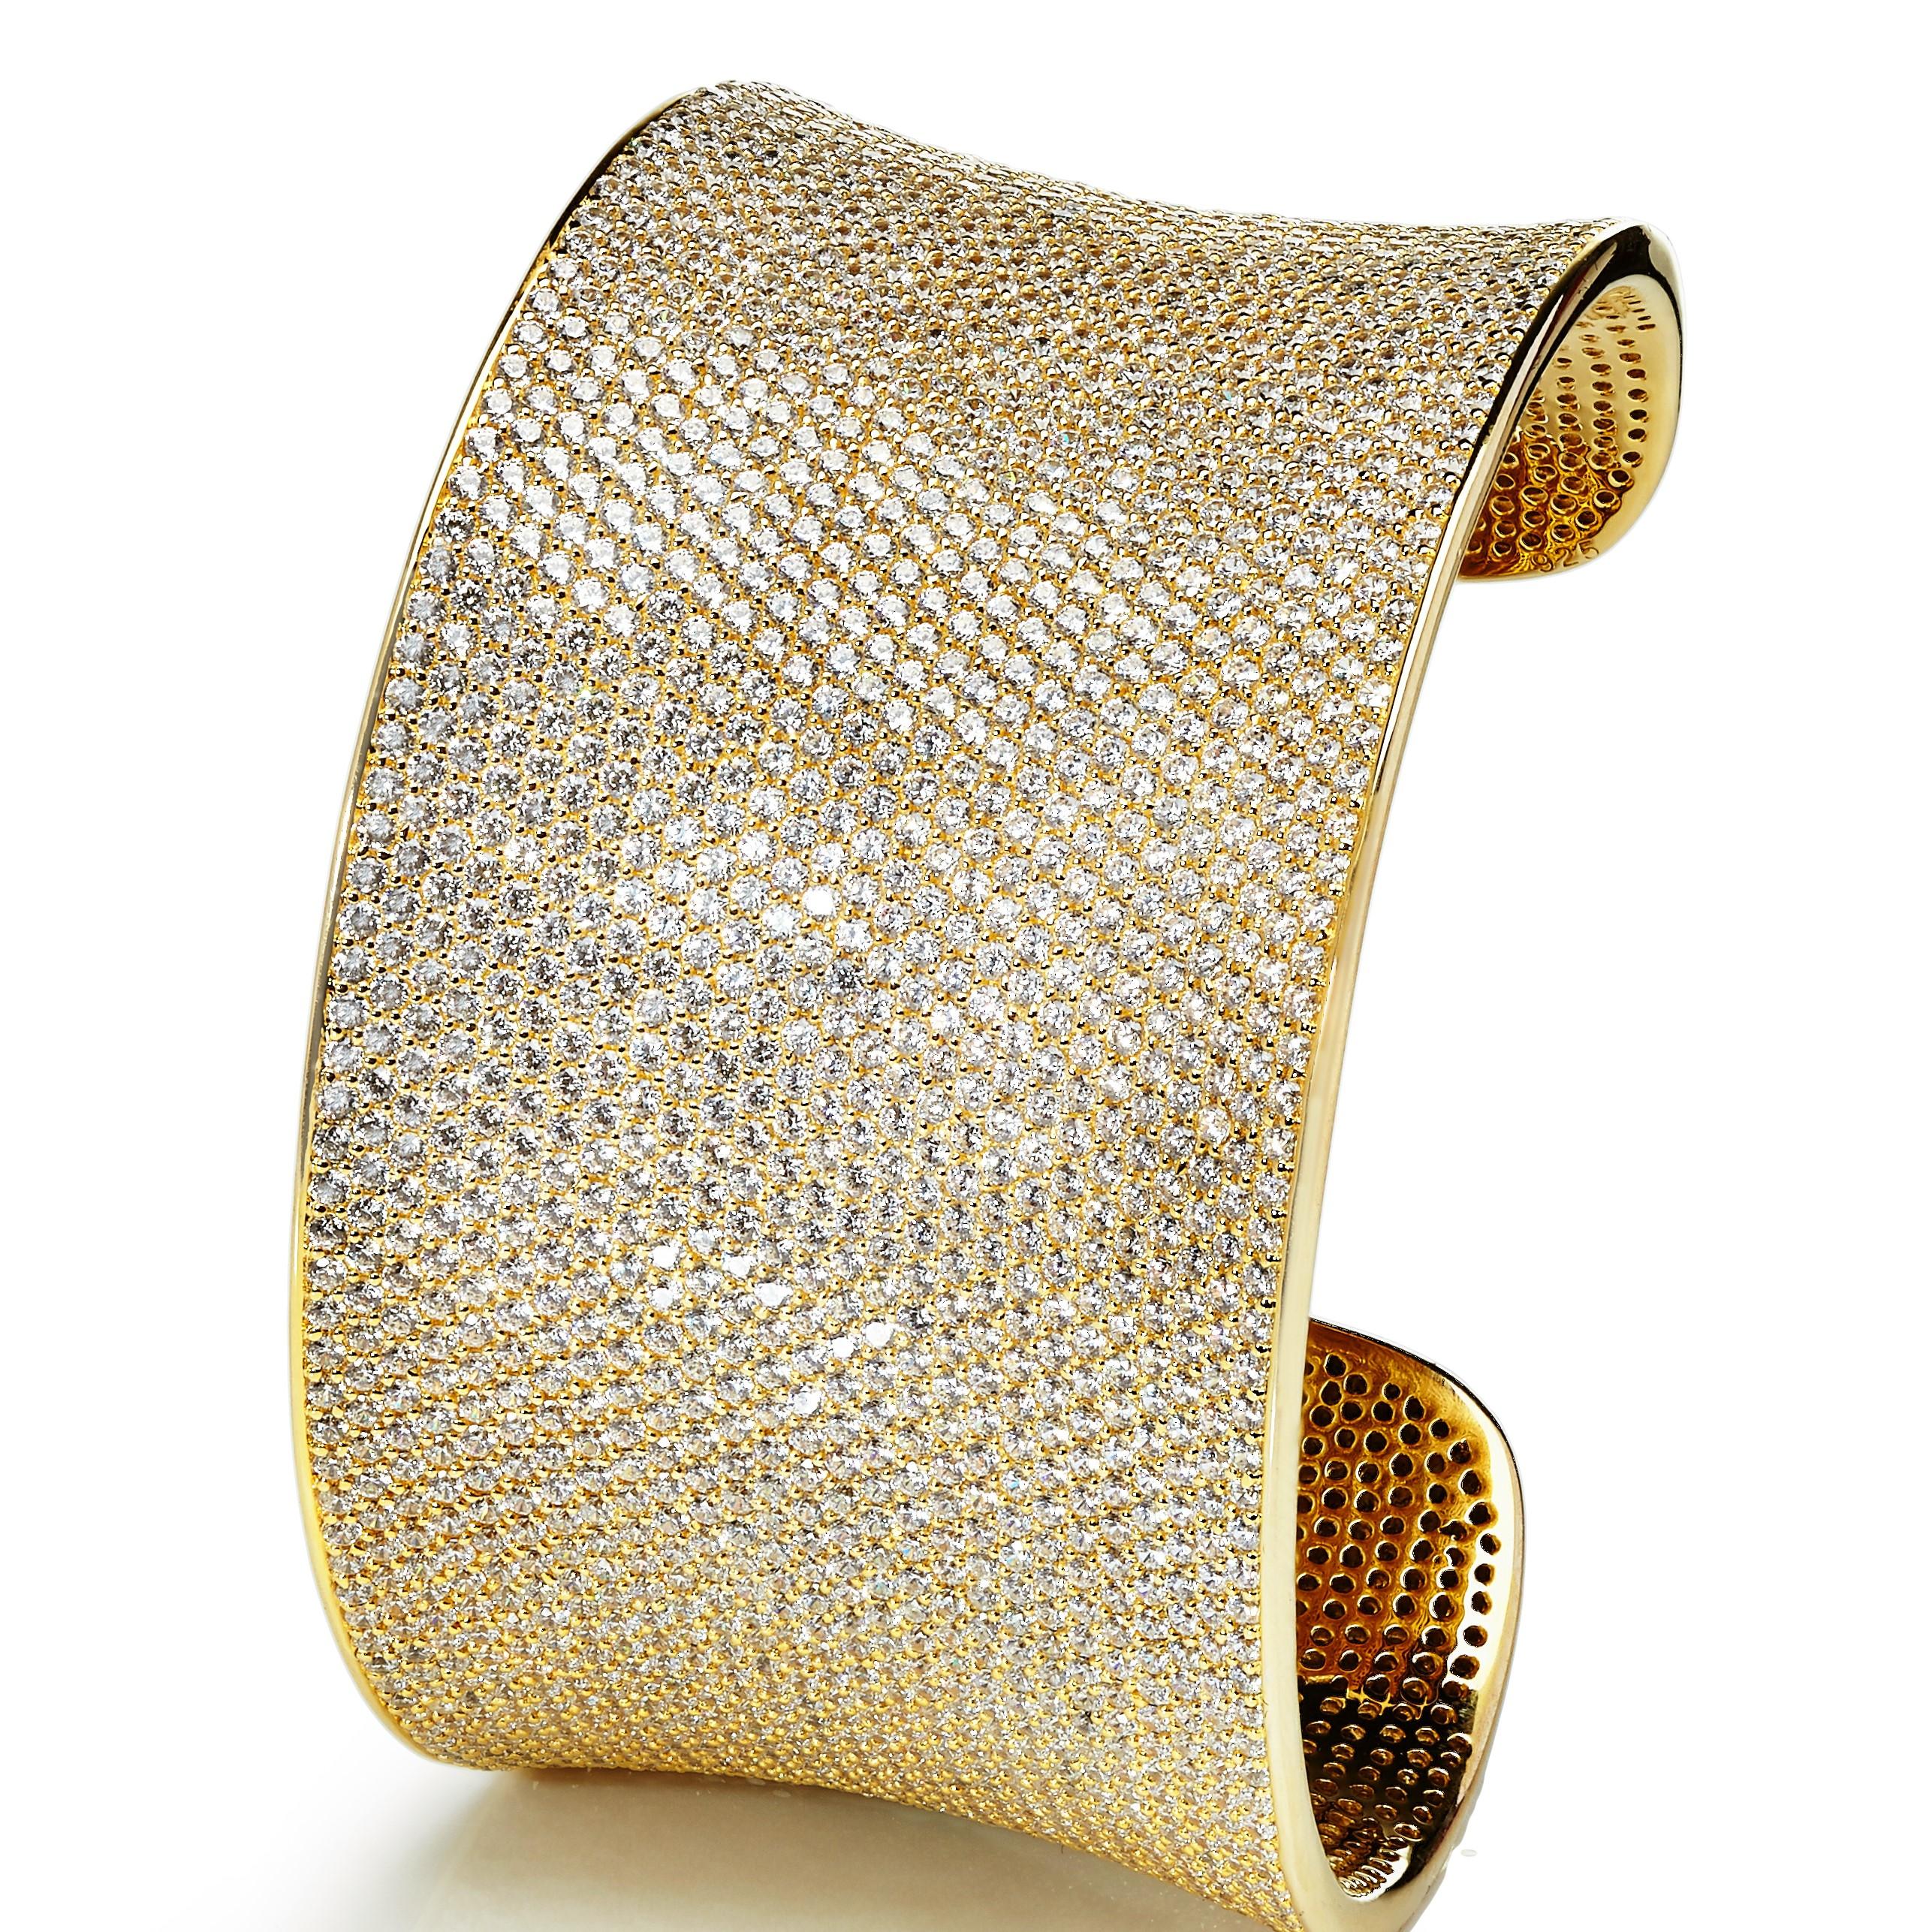 This spectacular micro-set cuff bangle is a guaranteed show stopper.

As our signature piece, it represents the collection’s style and uniqueness.

Encrusted with over 2,500 of the highest quality brilliant cut cubic zirconia, this statement bangle